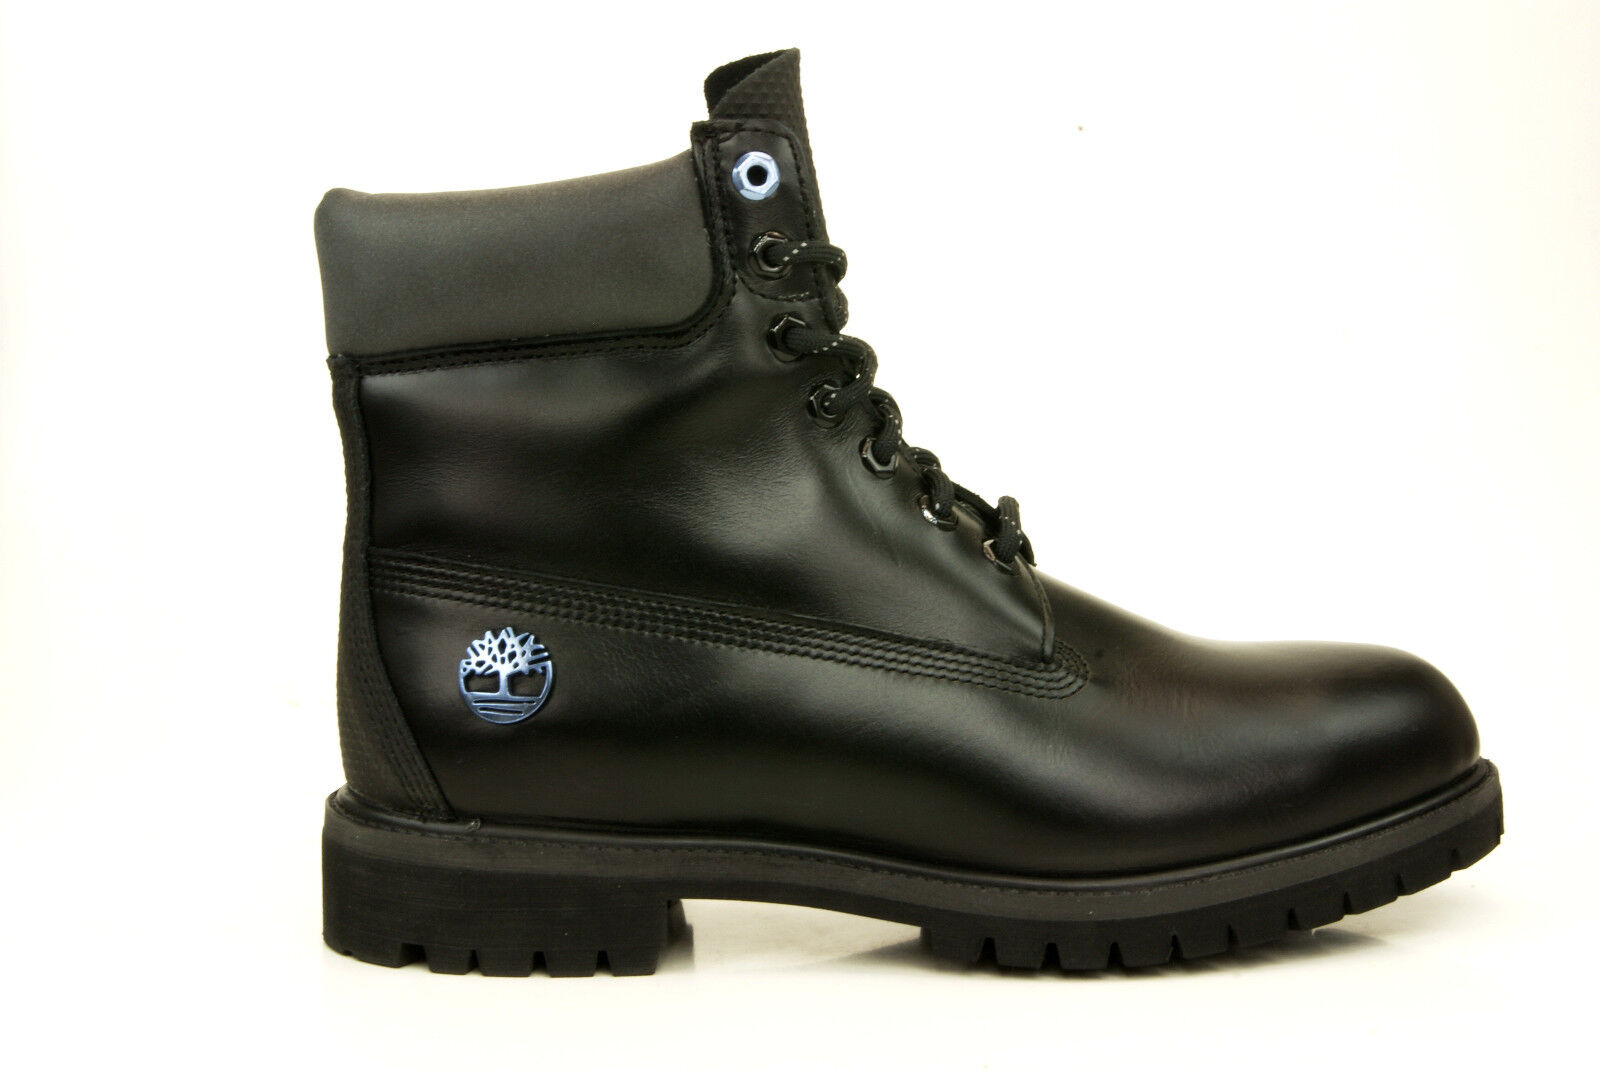 Timberland 6 Inch Premium Boots  Limited Edition Waterproof Herren Stiefel A1Q7Y